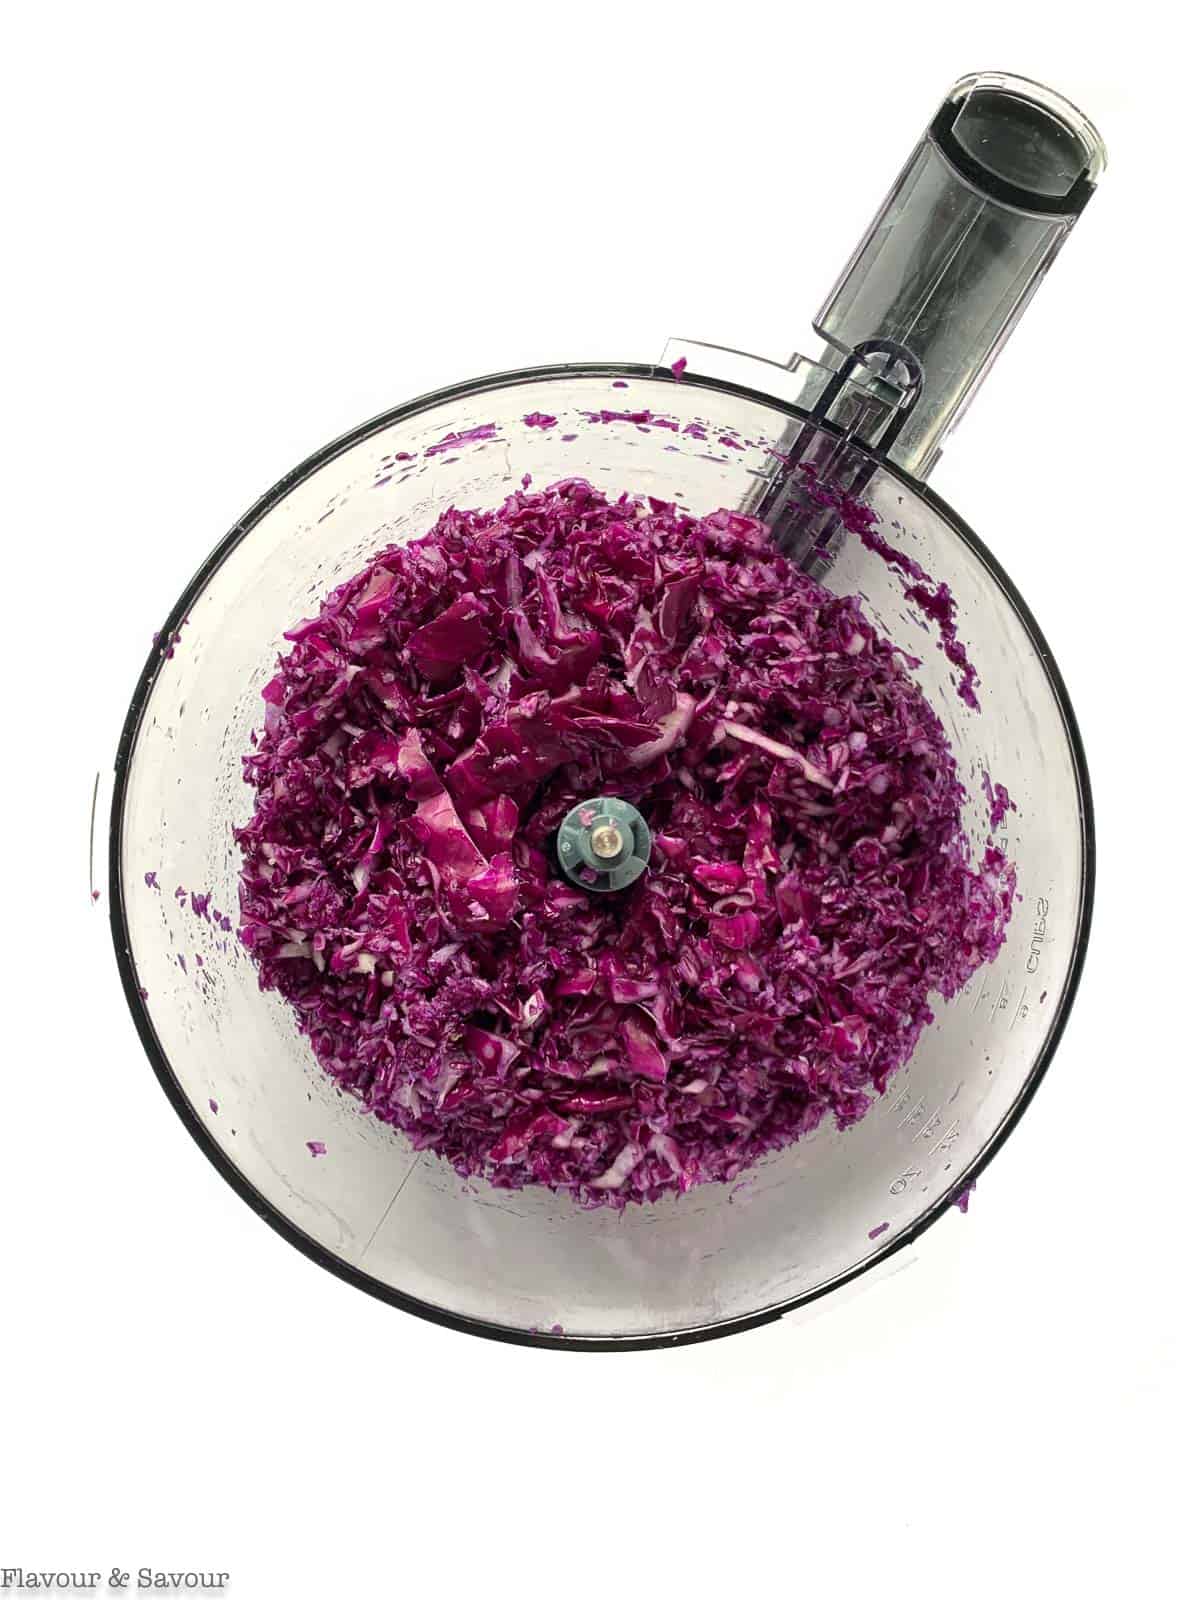 Grated red cabbage in a food processor bowl.